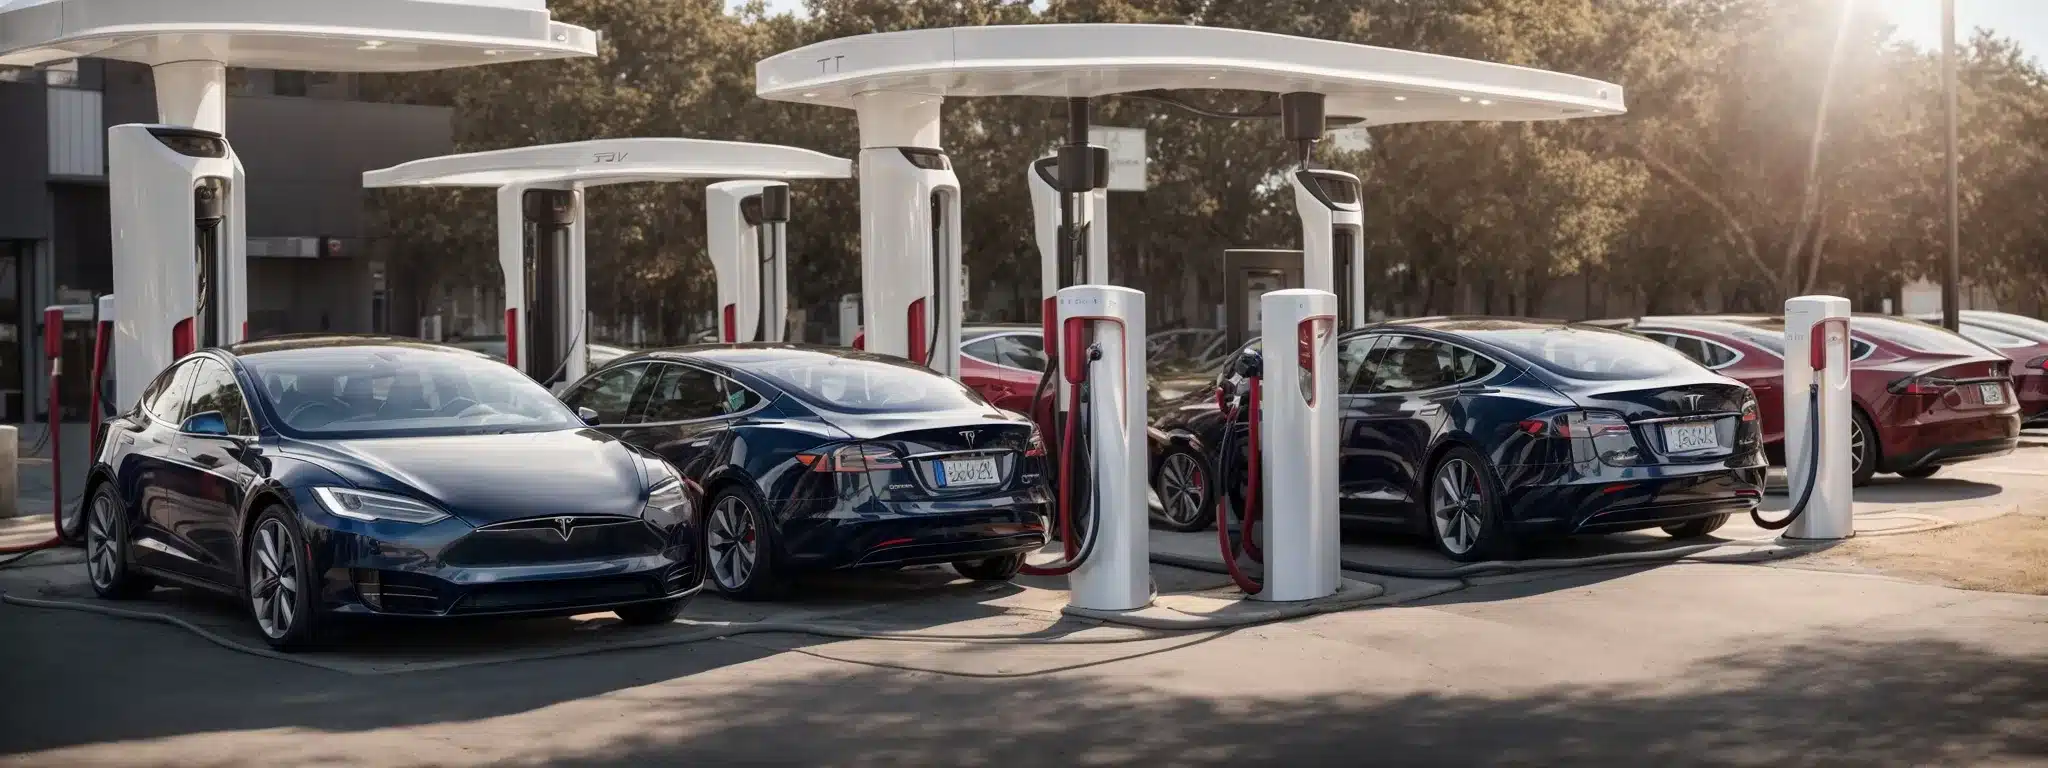 A Tesla Car Charging At A Supercharger Station Amidst A Fleet Of Electric Vehicles On A Sunny Day.